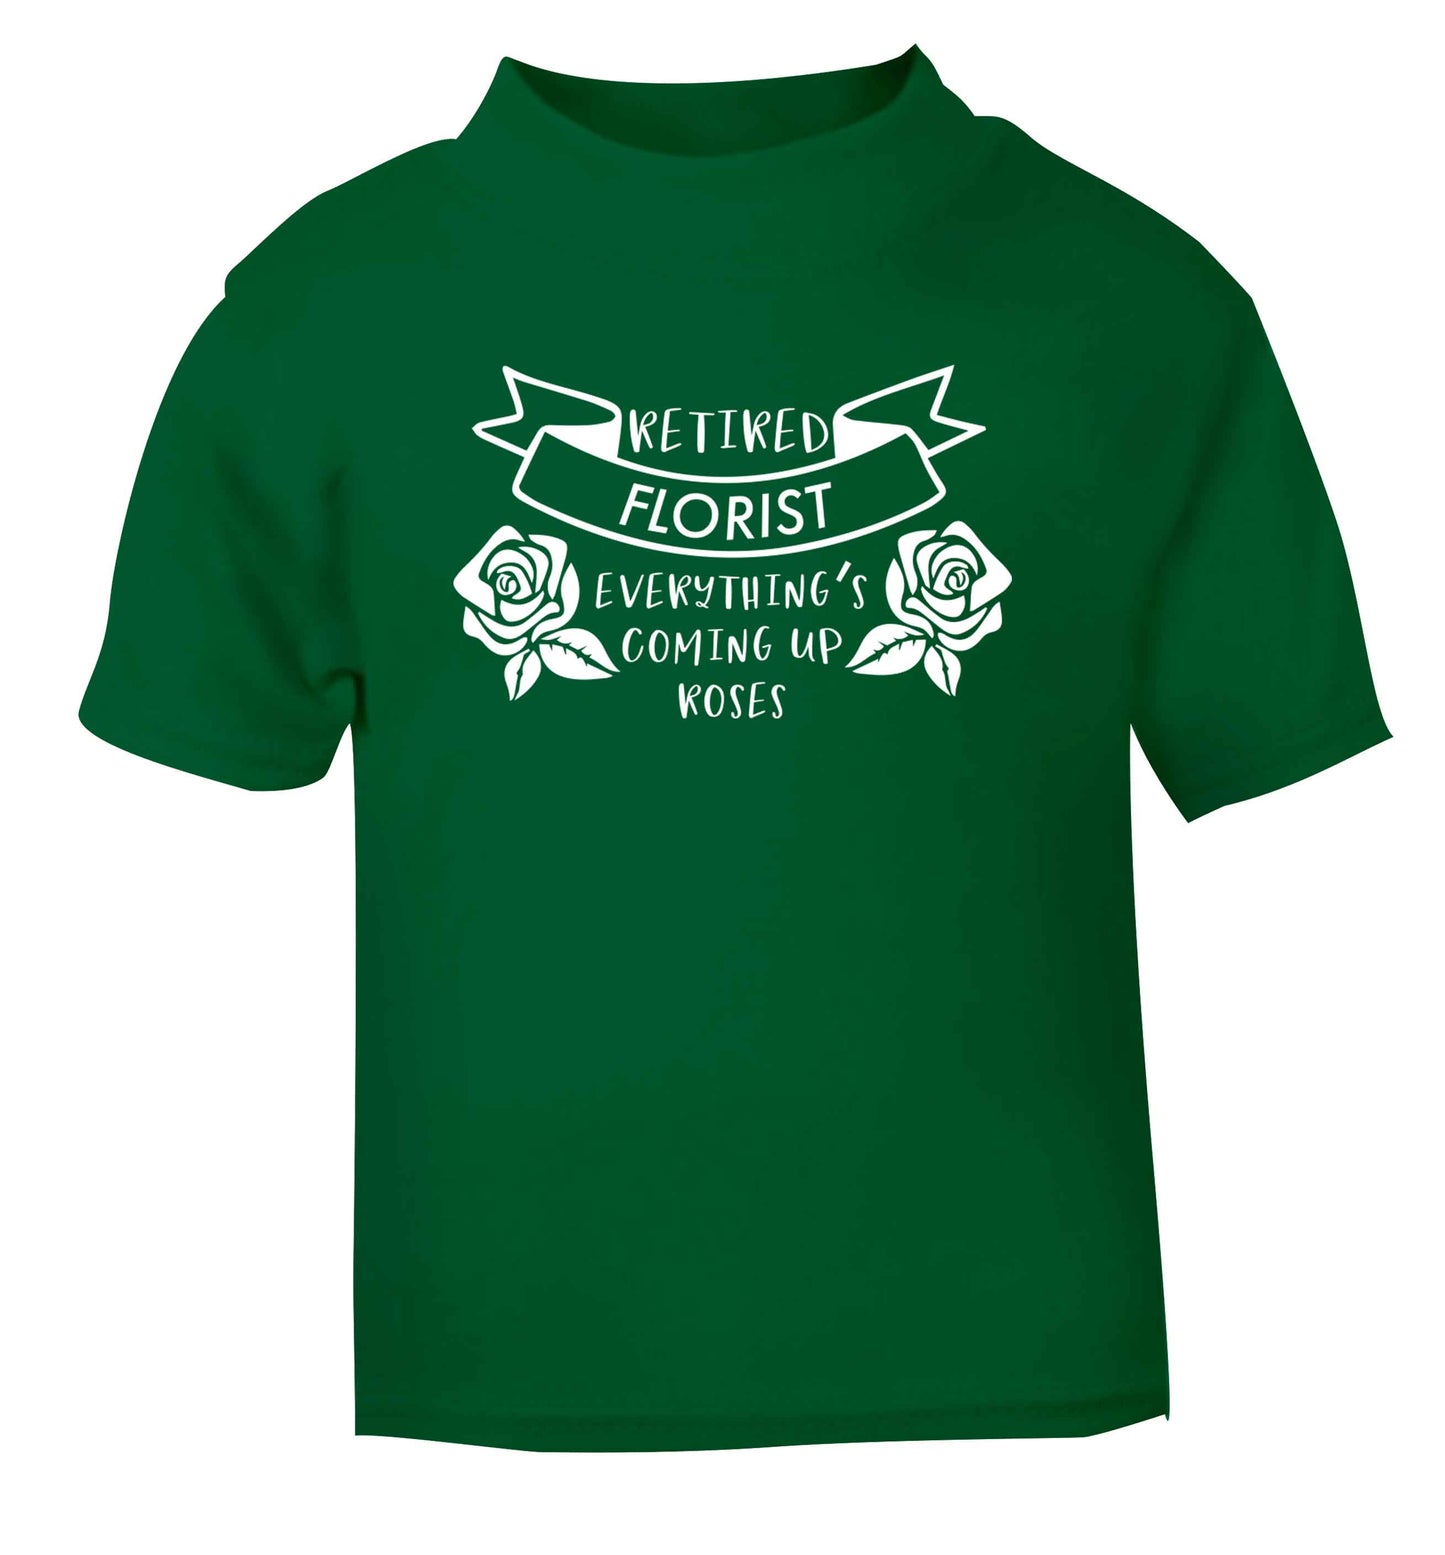 Retired florist everything's coming up roses green Baby Toddler Tshirt 2 Years